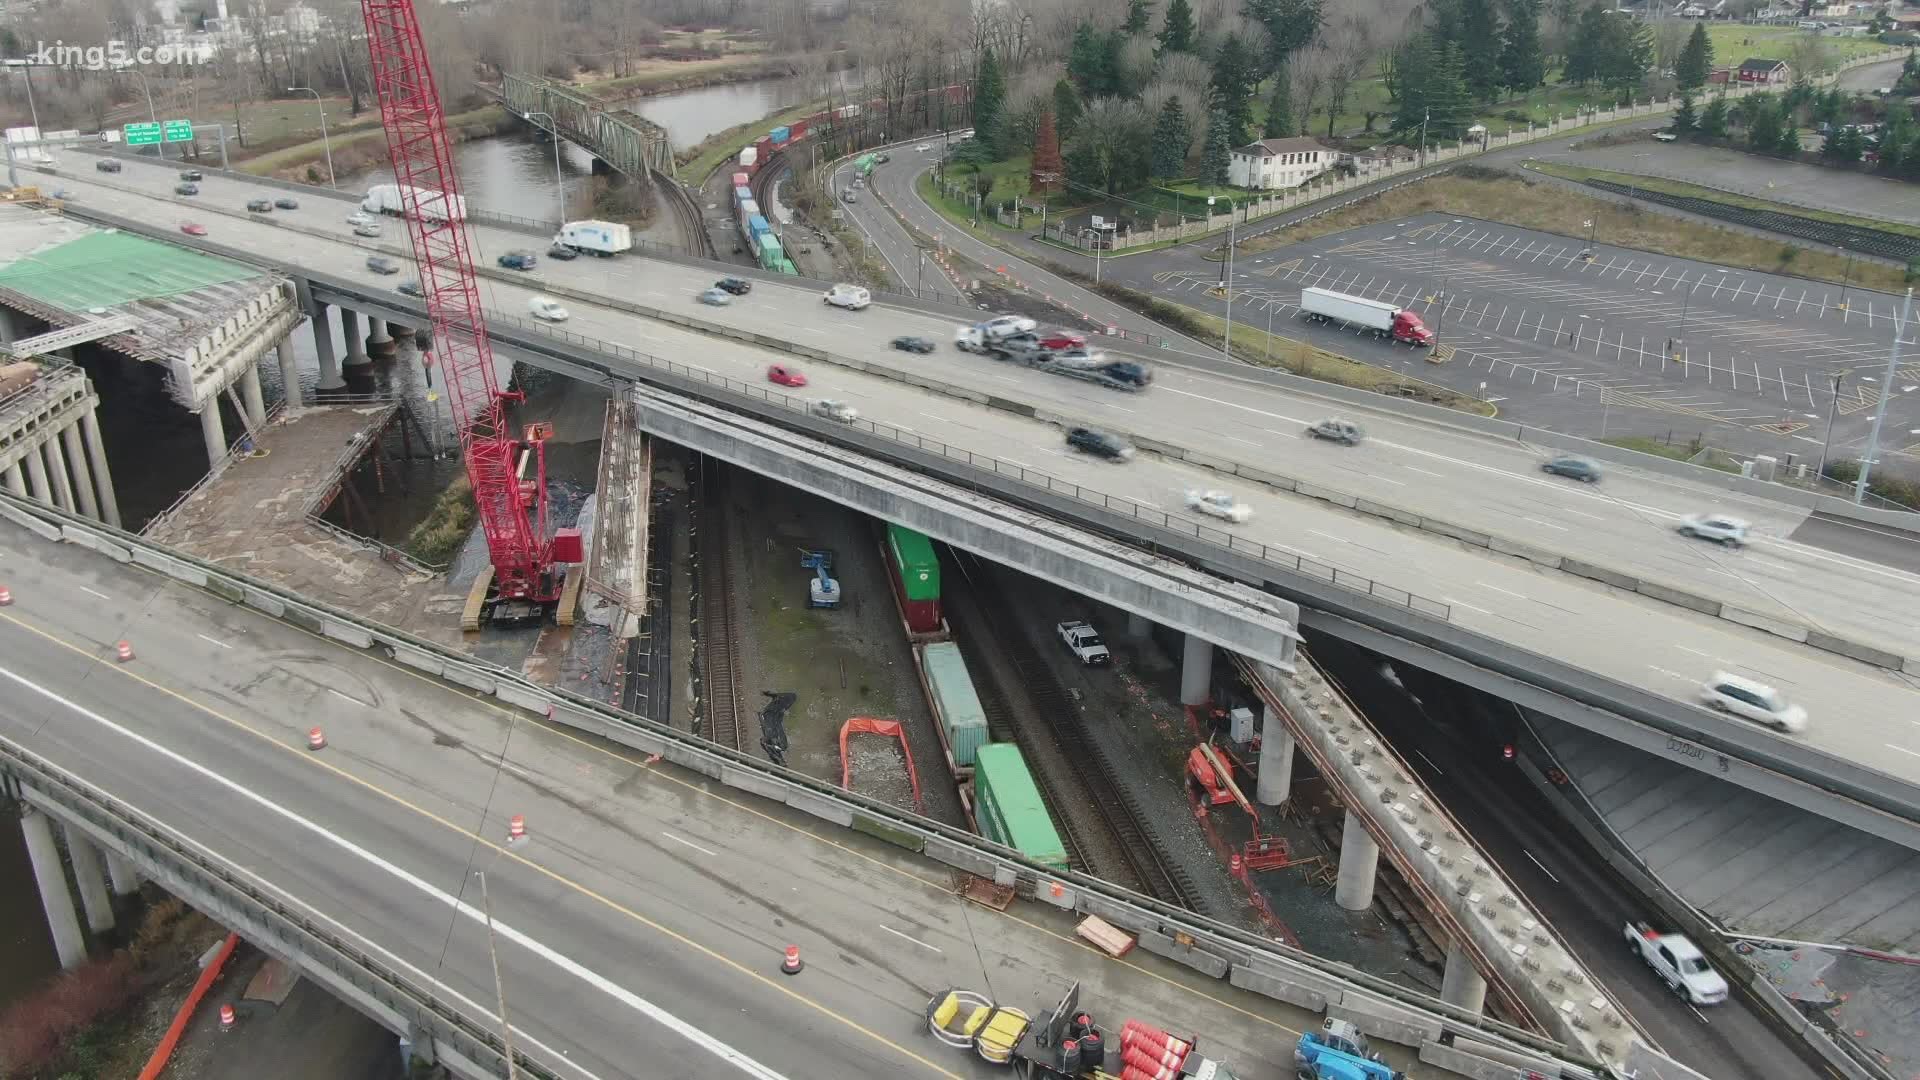 The bridge project is the last of 14 major projects that have stretched out along I-5 through Tacoma for two decades.